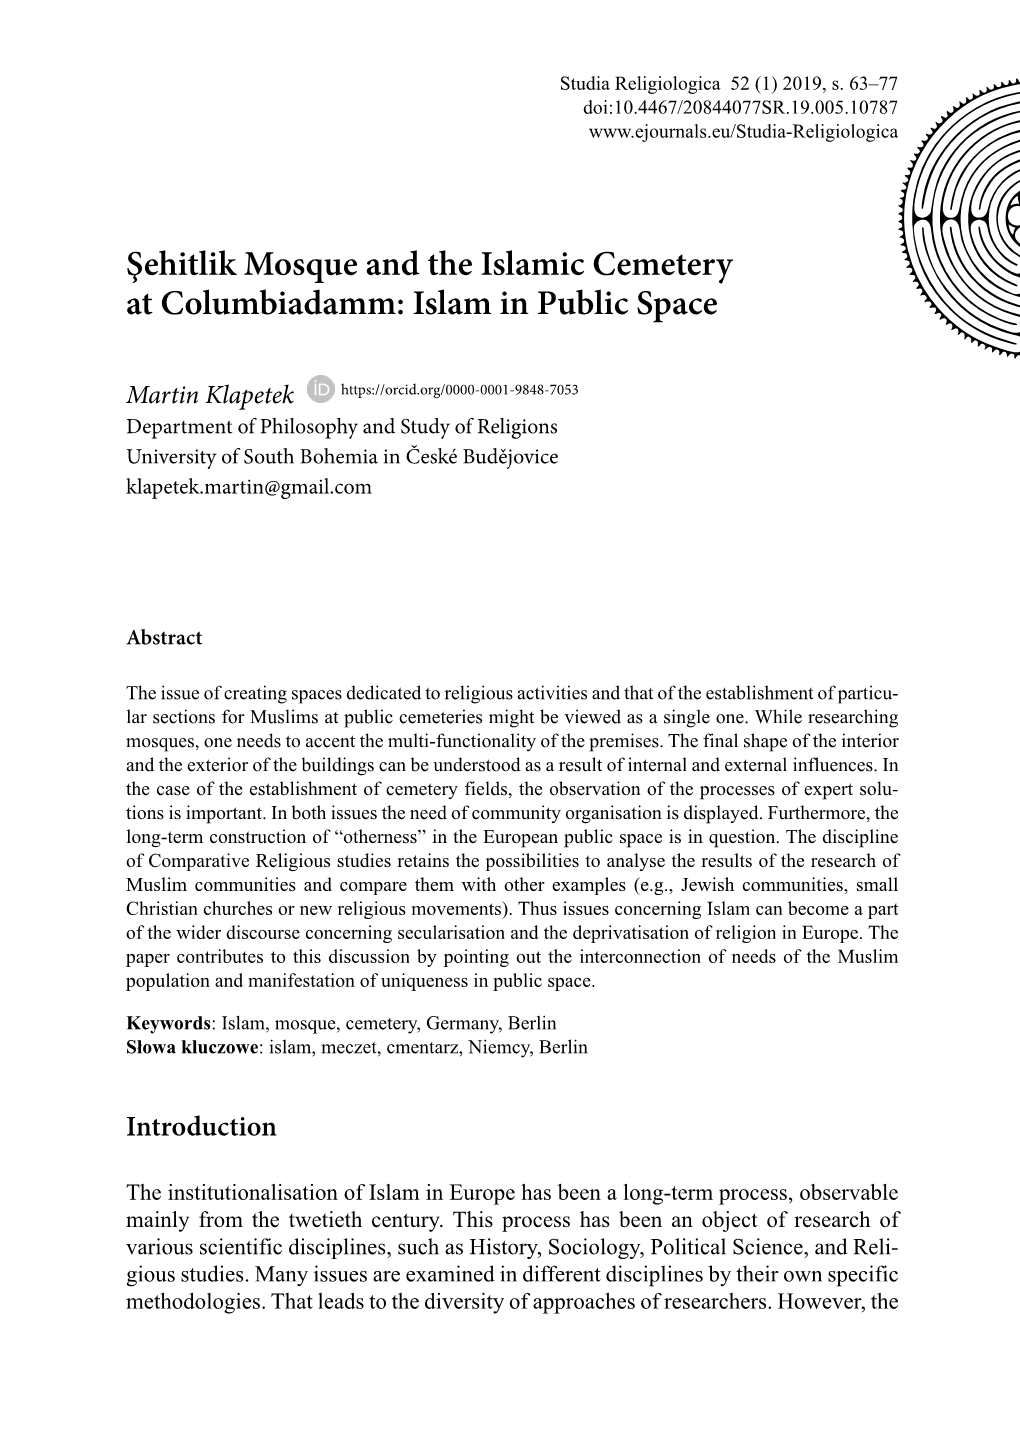 Şehitlik Mosque and the Islamic Cemetery at Columbiadamm: Islam in Public Space